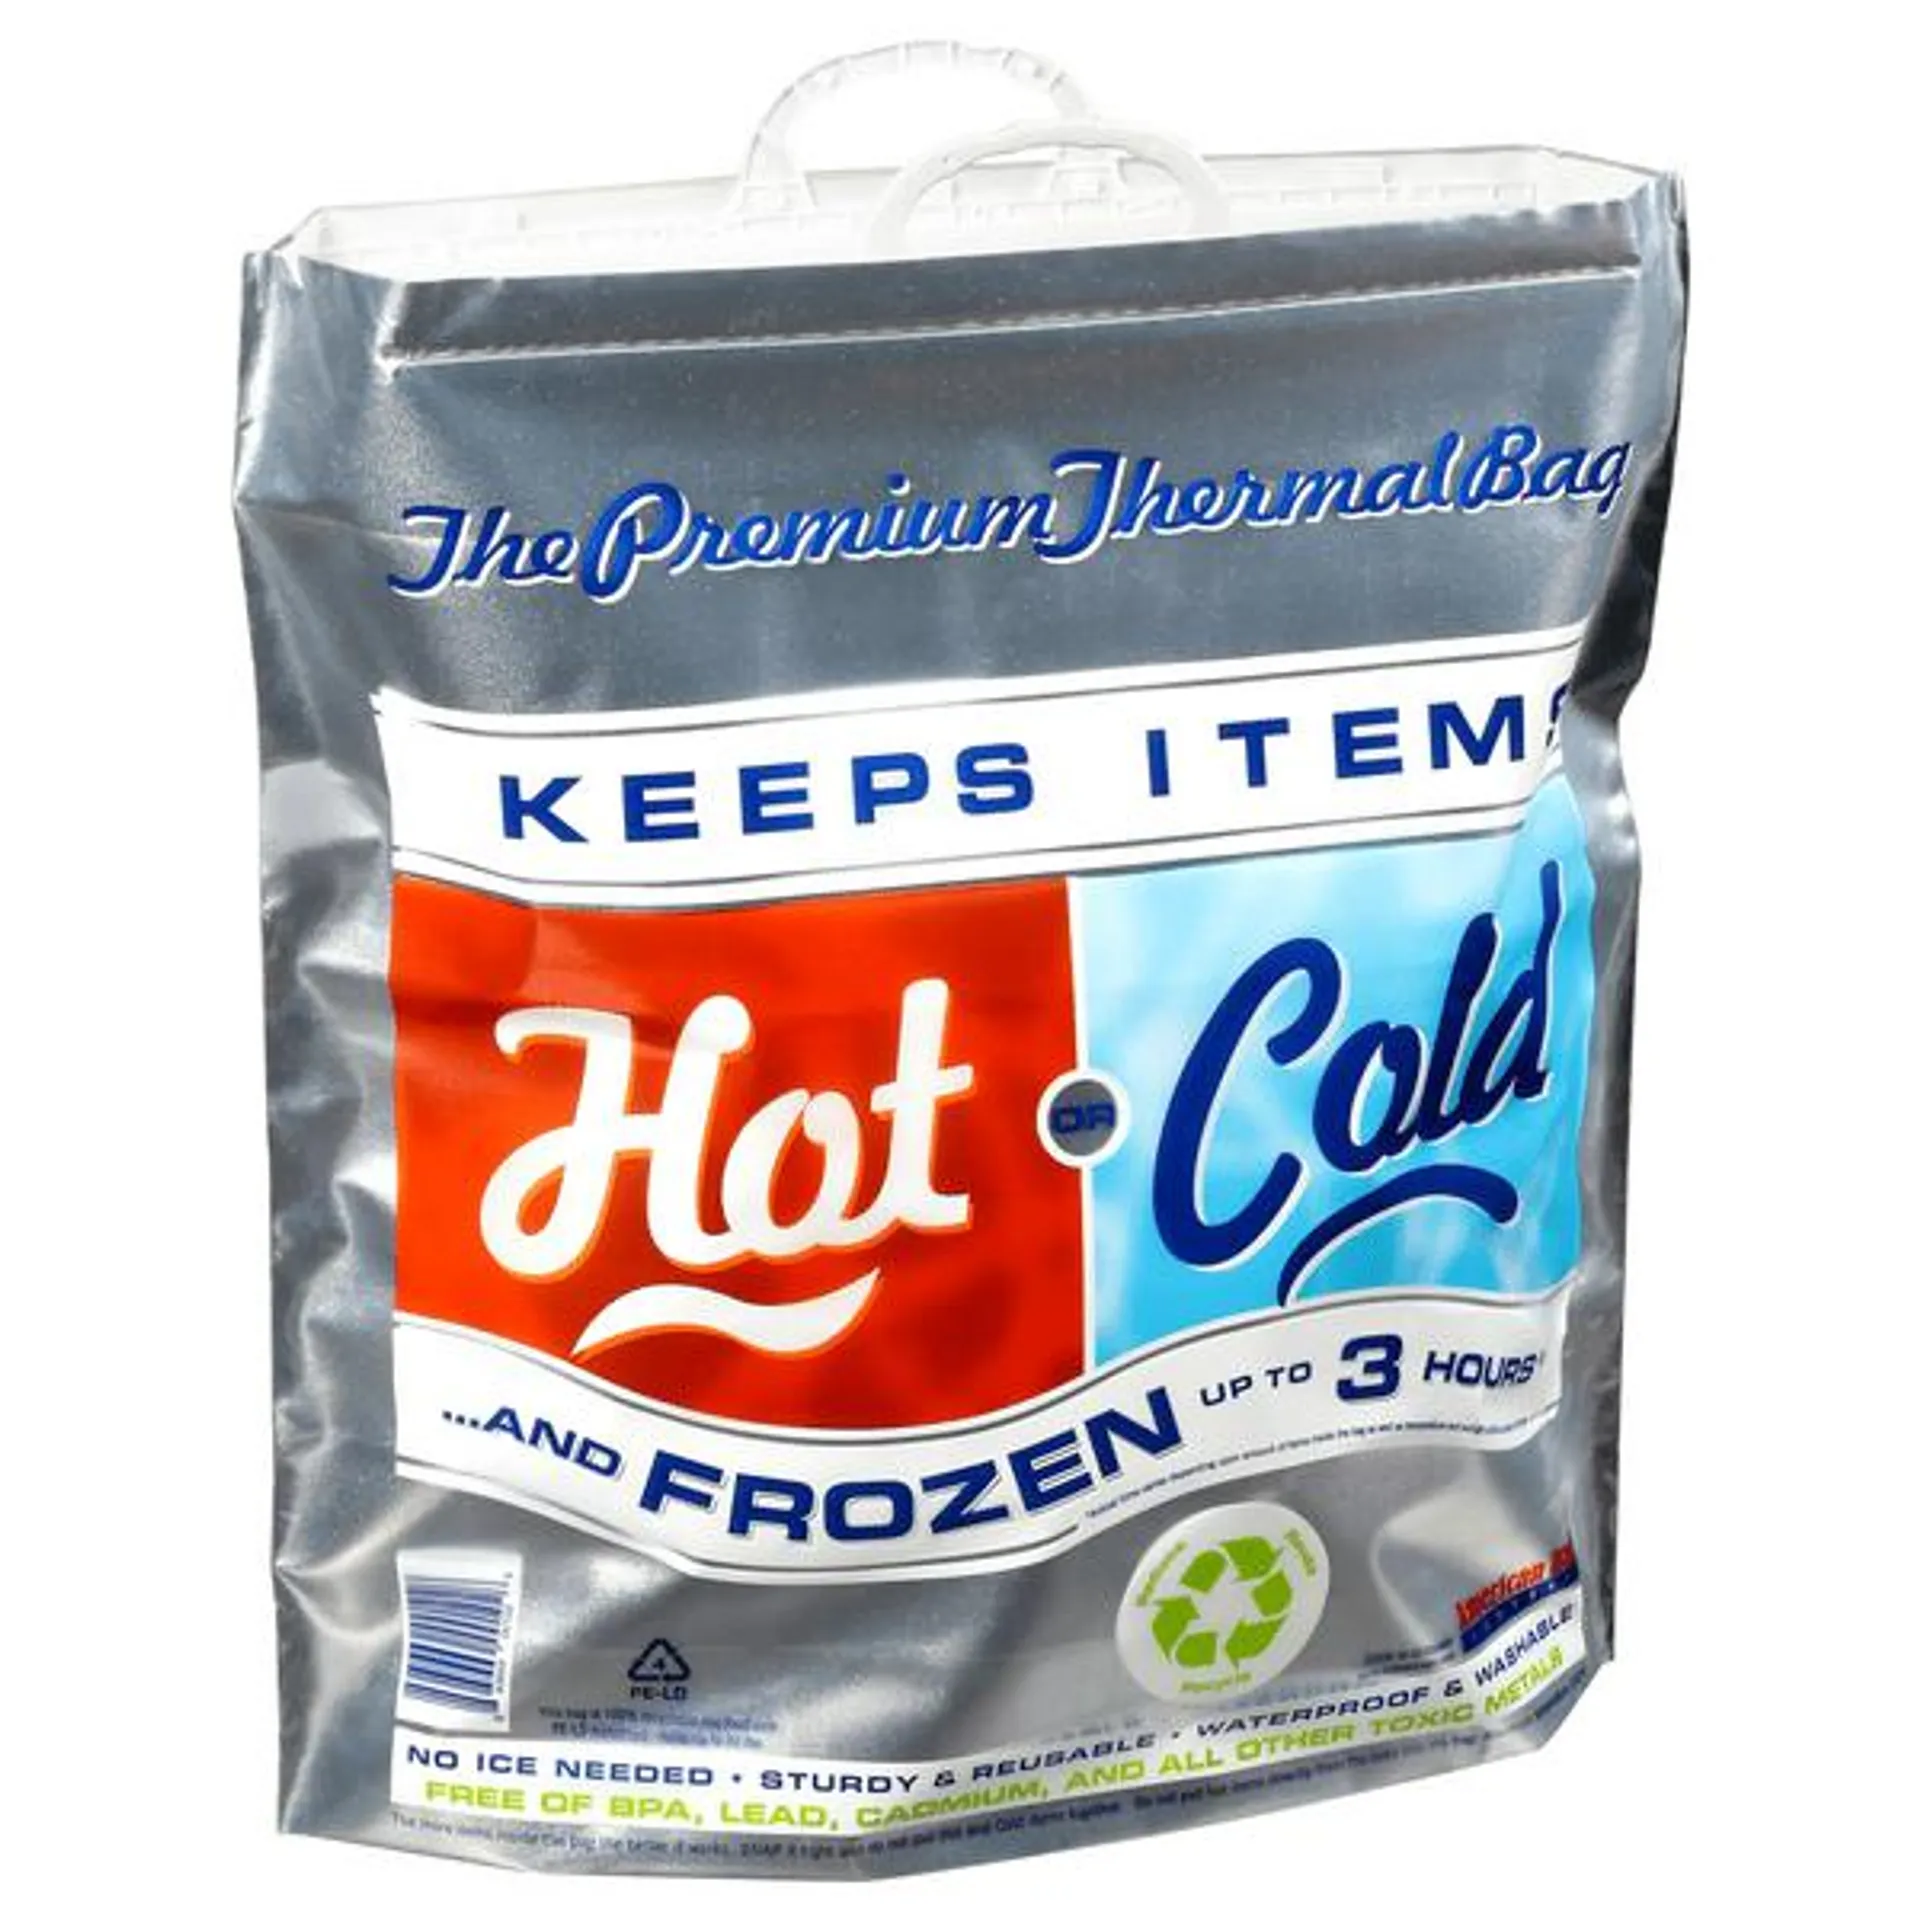 Thermasnap Hot-Cold Bag 20x20x7